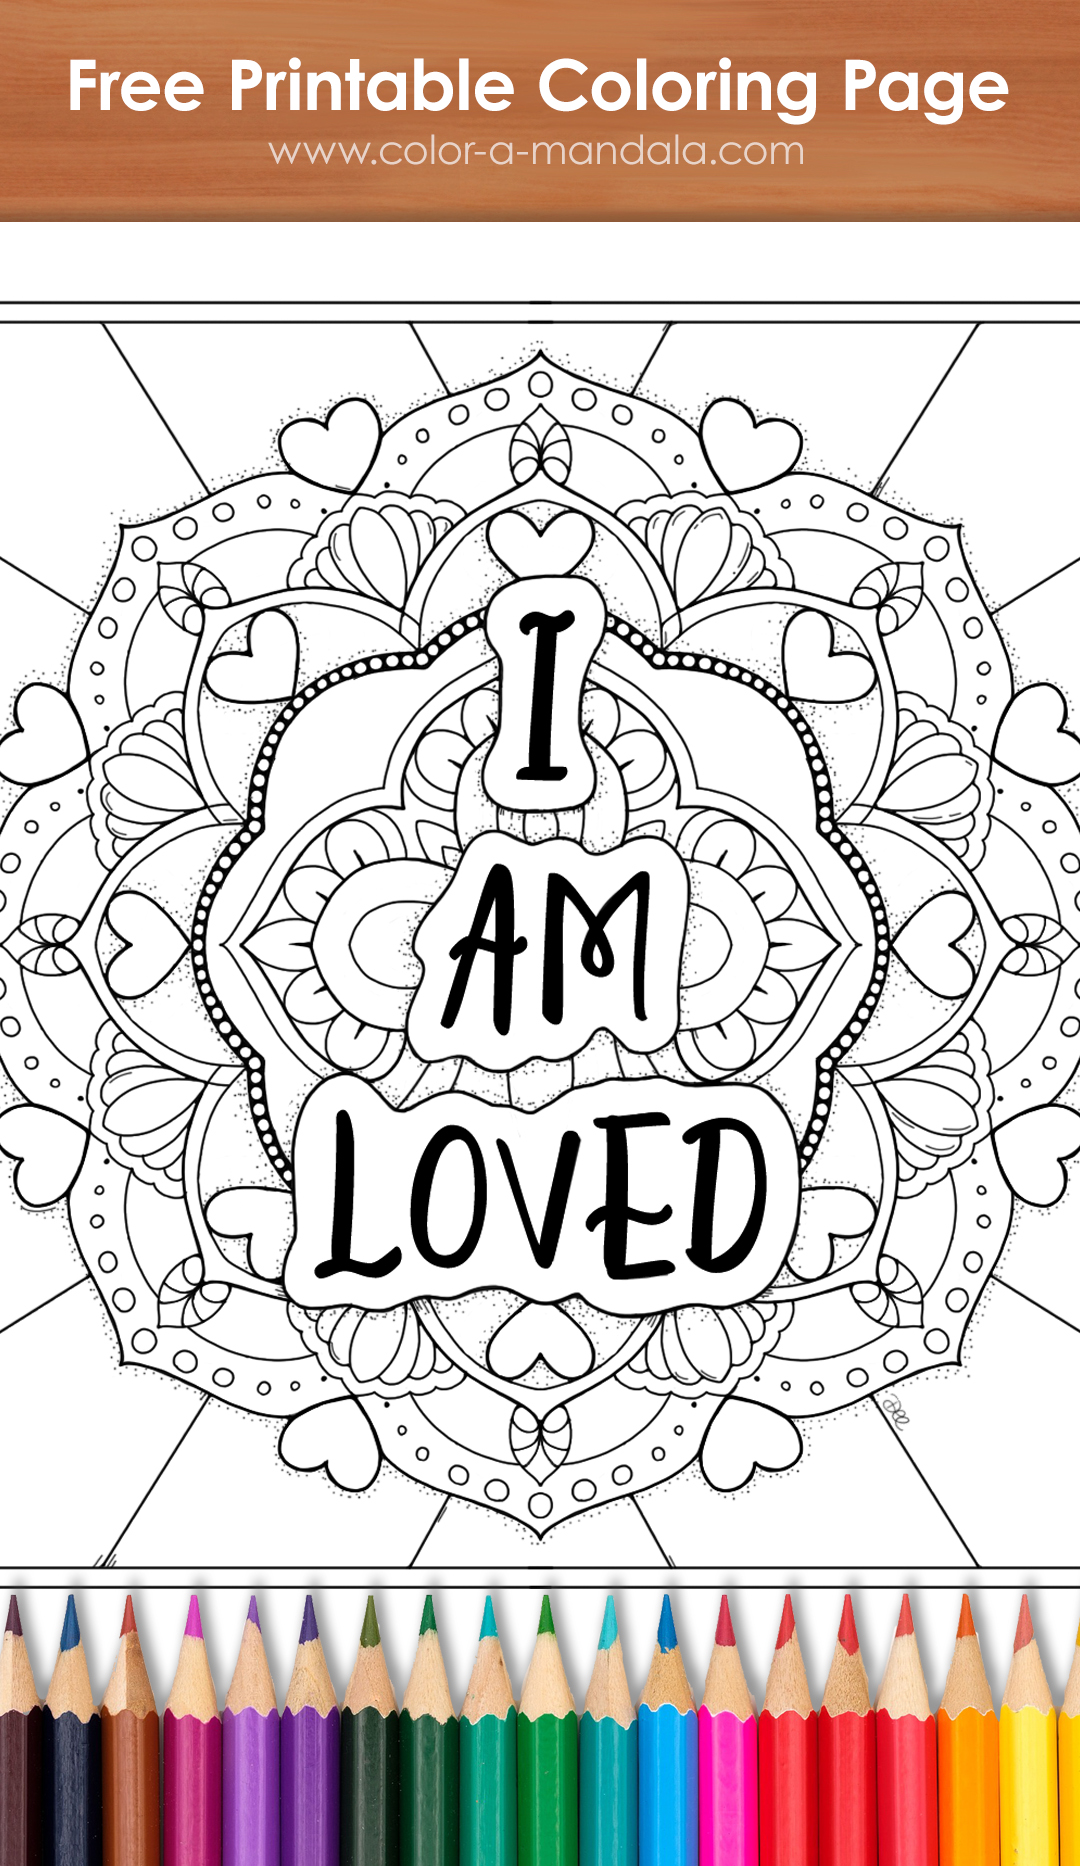 Image of an affirmation coloring page with hearts and the words I am Loved